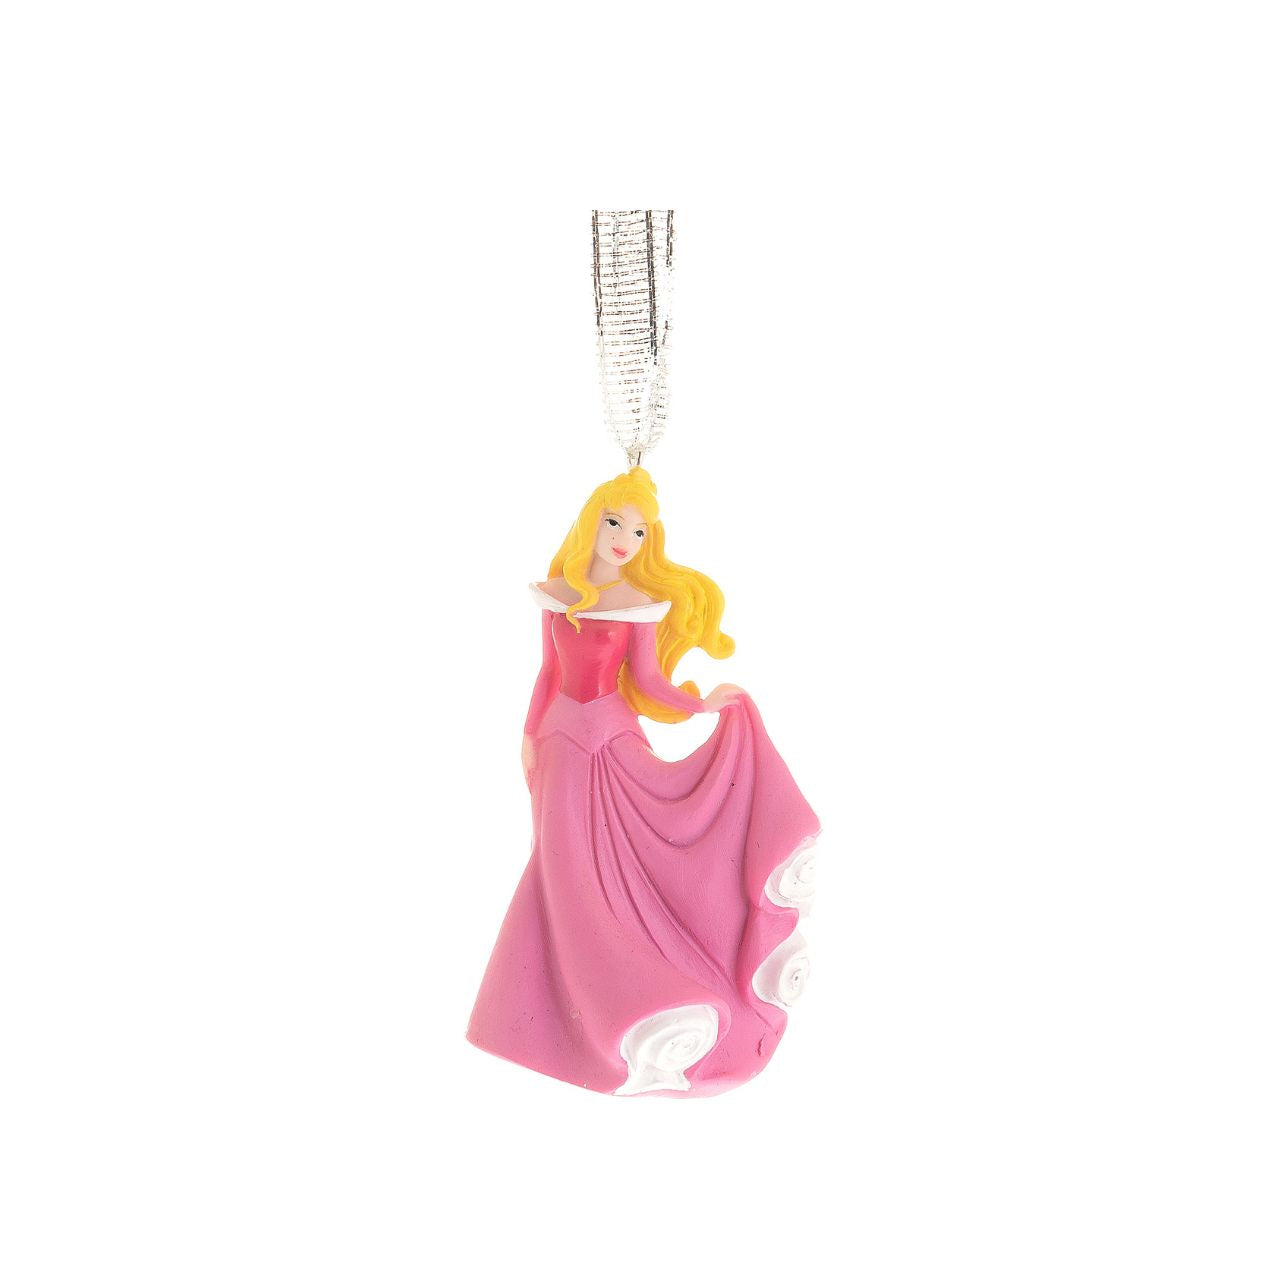 Disney Set of 4 Princess Resin Hanging Decorations  Bring some Disney magic to any tree this year with this glittering set of Princess hanging decorations. Perfect for Disney fans young and old, these beautiful figurines are sure to brighten up any home.